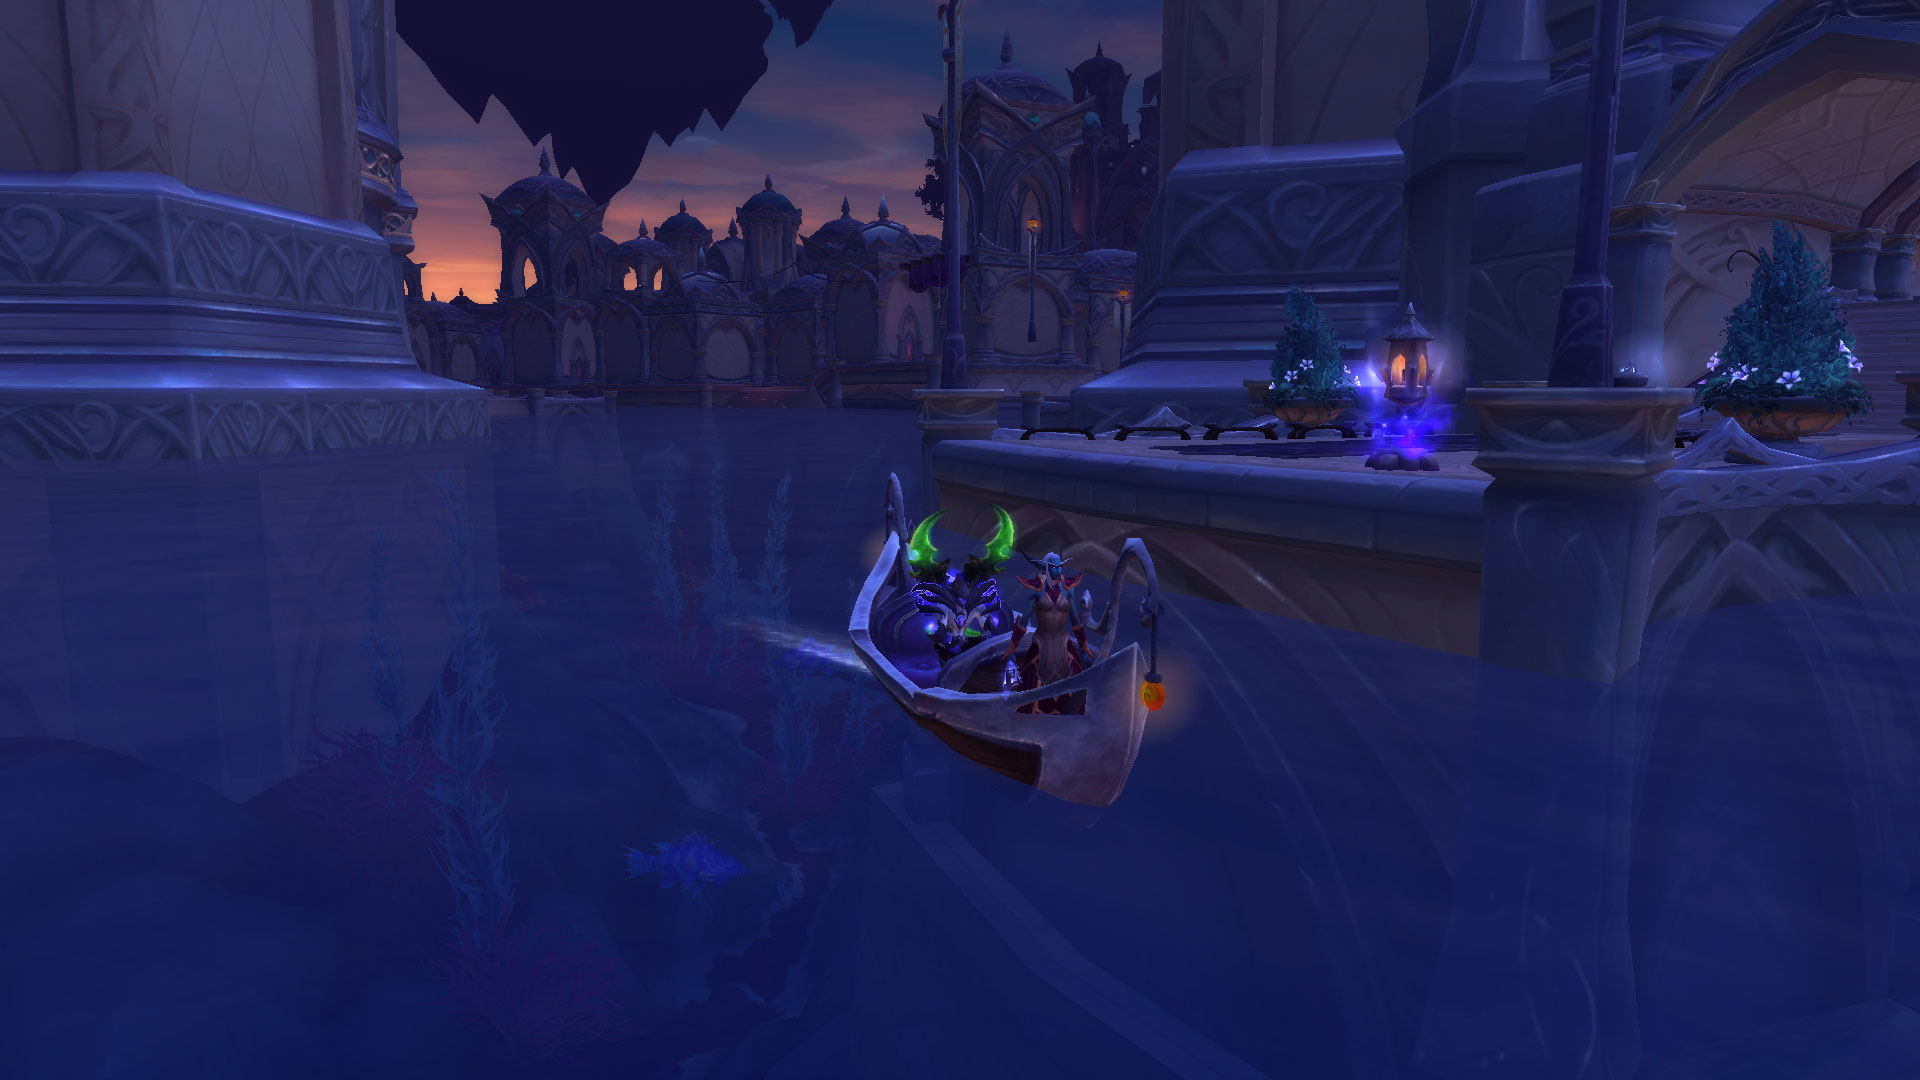 WoW The Night Elf is sailing on a boat